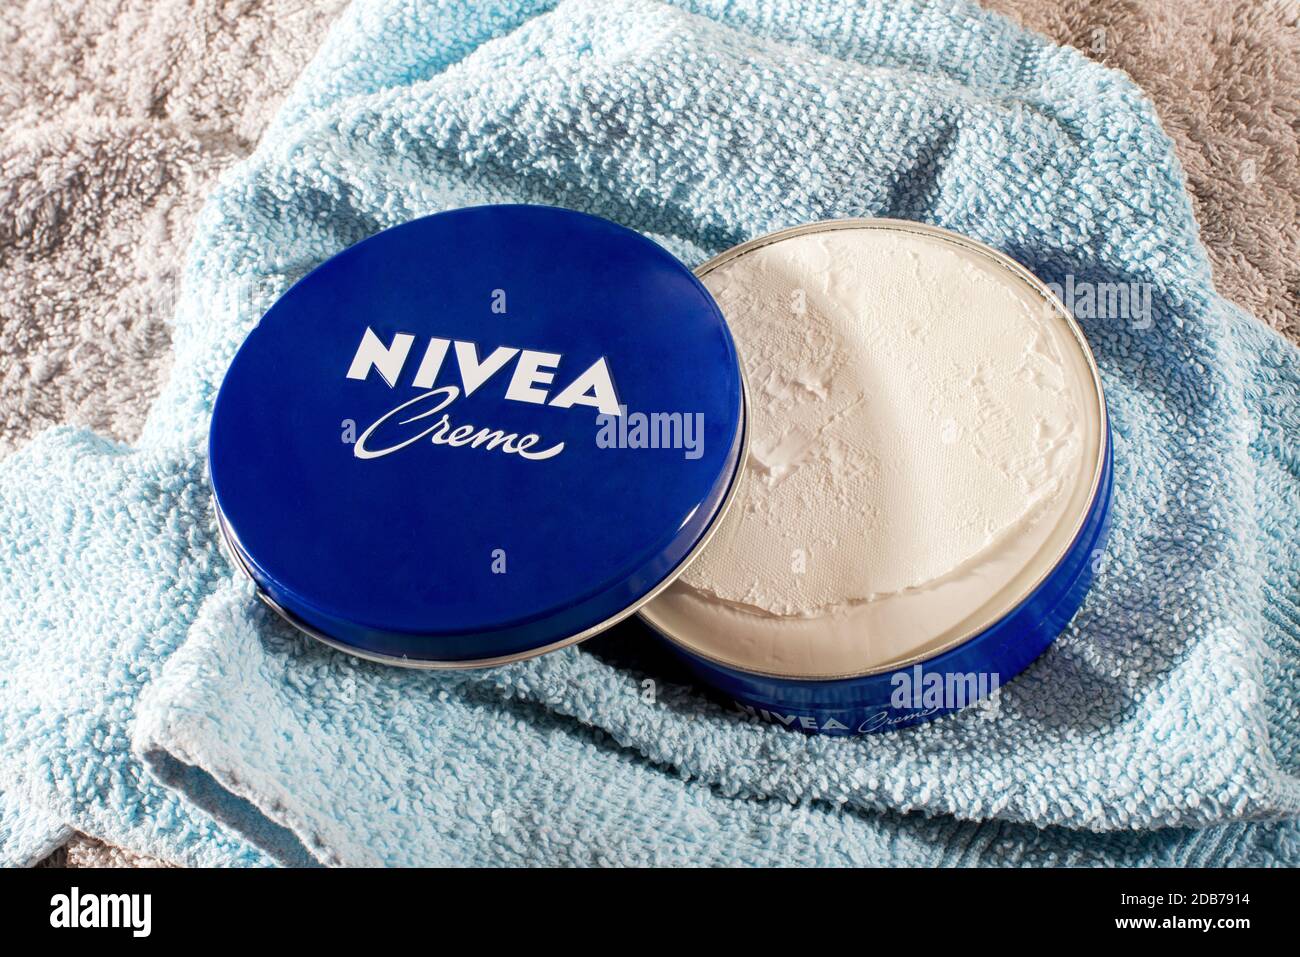 Tin of Nivea Creme showing the retail packaging opened to display the contents on a blue cotton towel Stock Photo